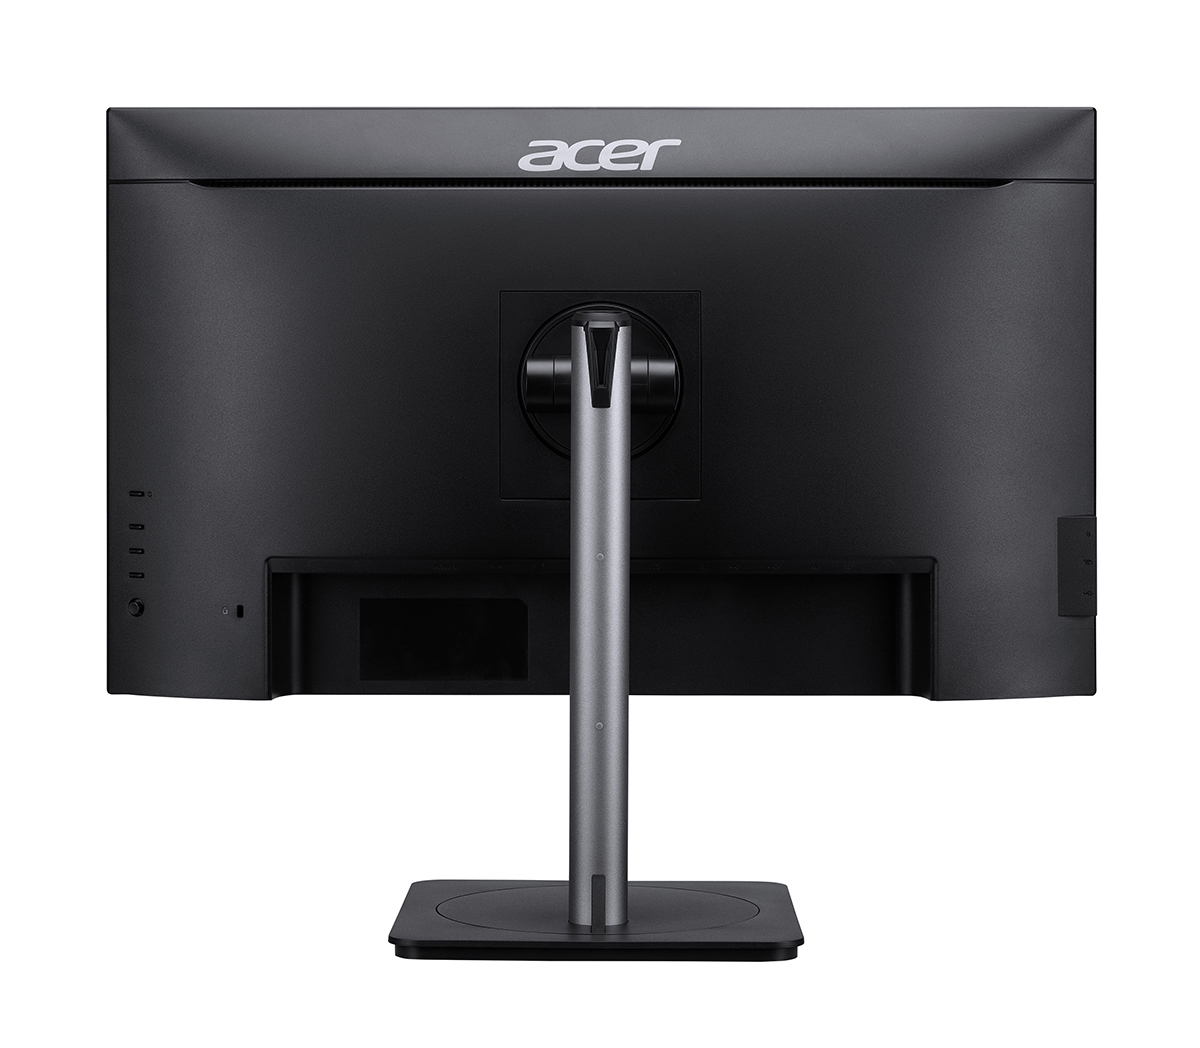 Acer unveils new monitors and 4K Projector for home entertainment